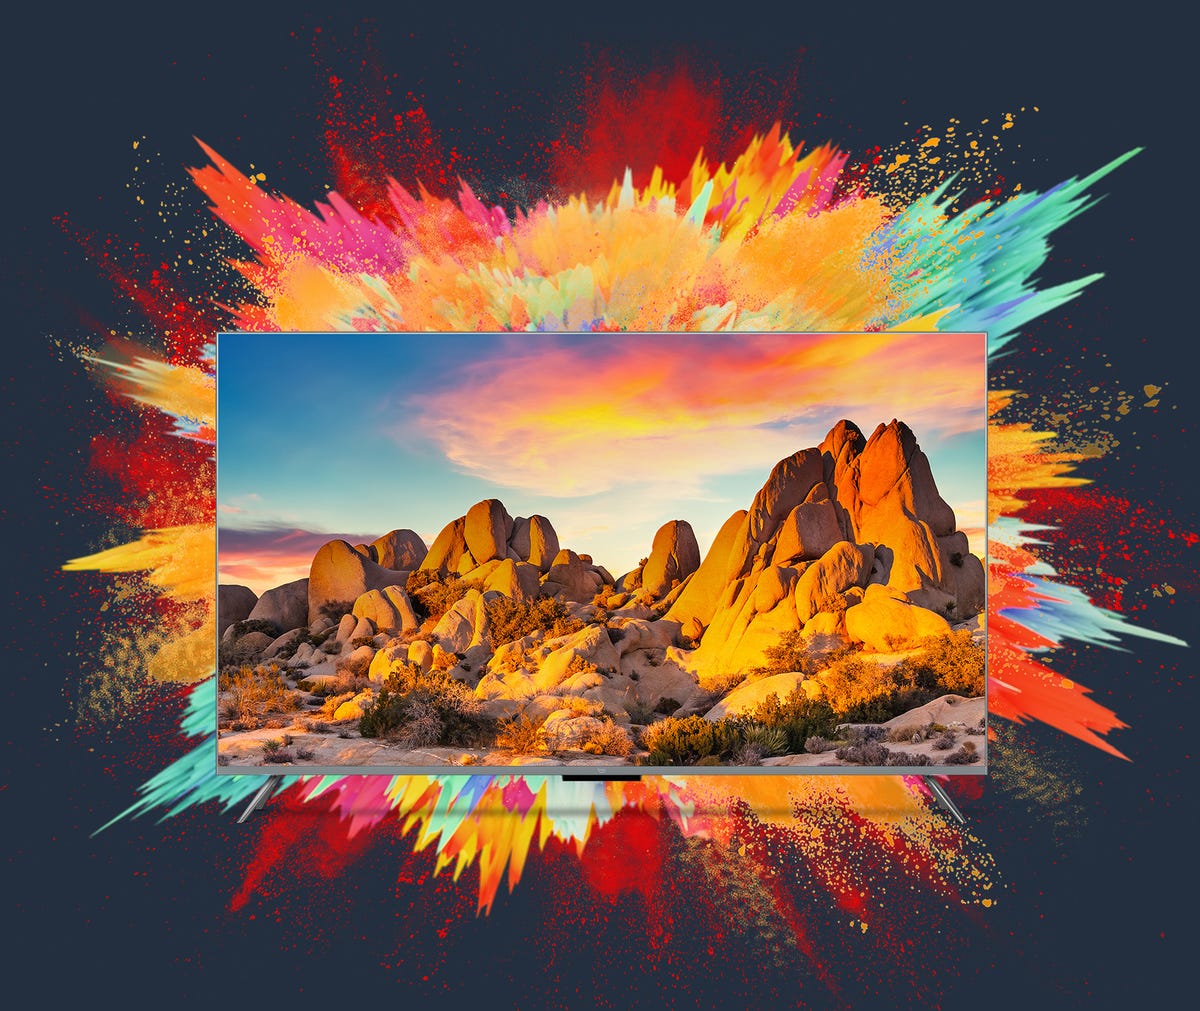 The Amazon Fire TV Omni QLED on a colorful background.